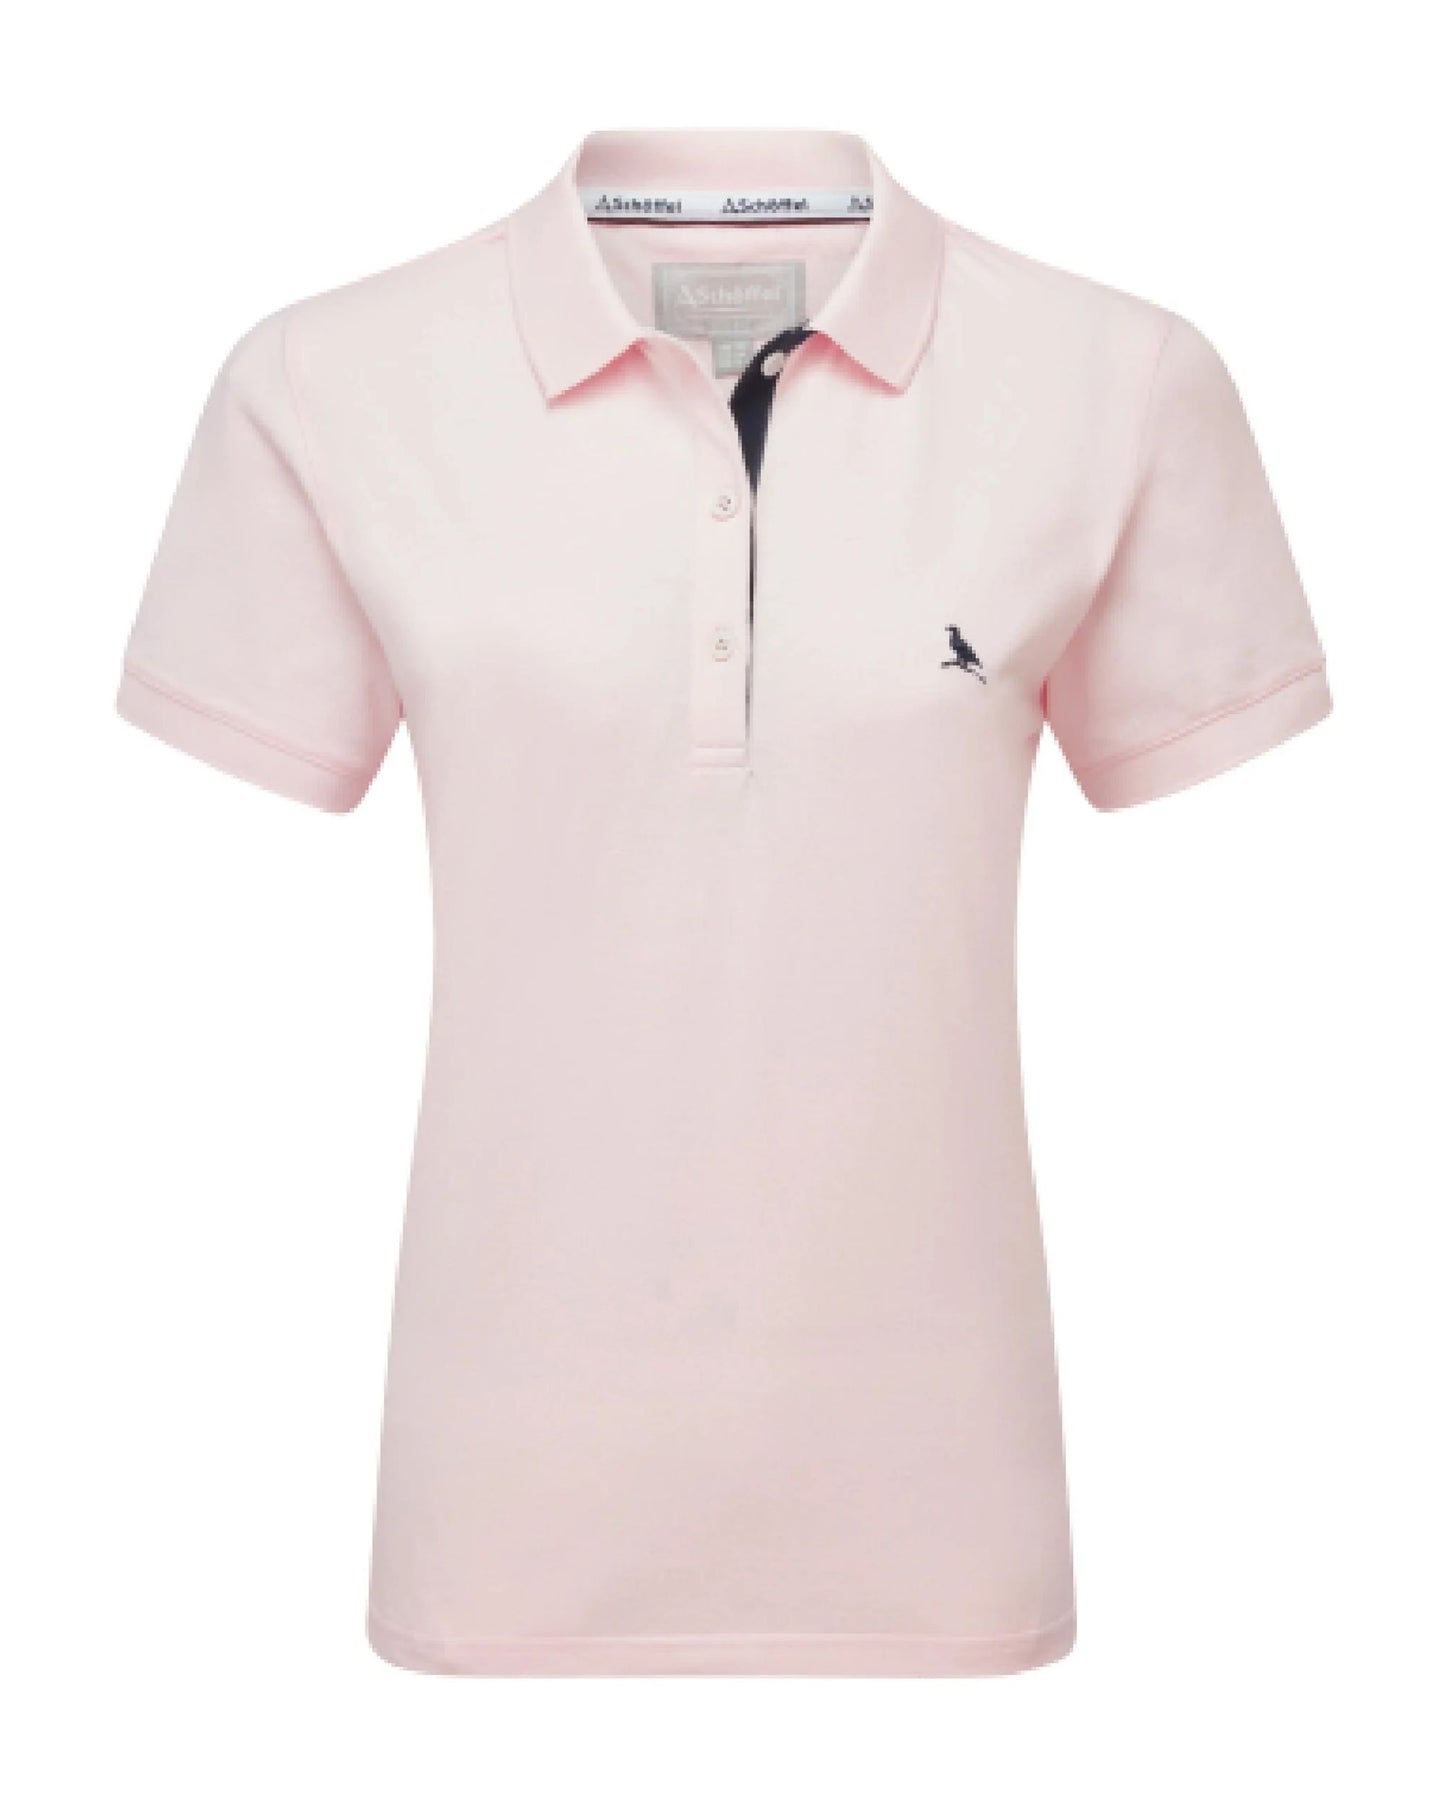 LADIES ST IVES POLO SHIRT